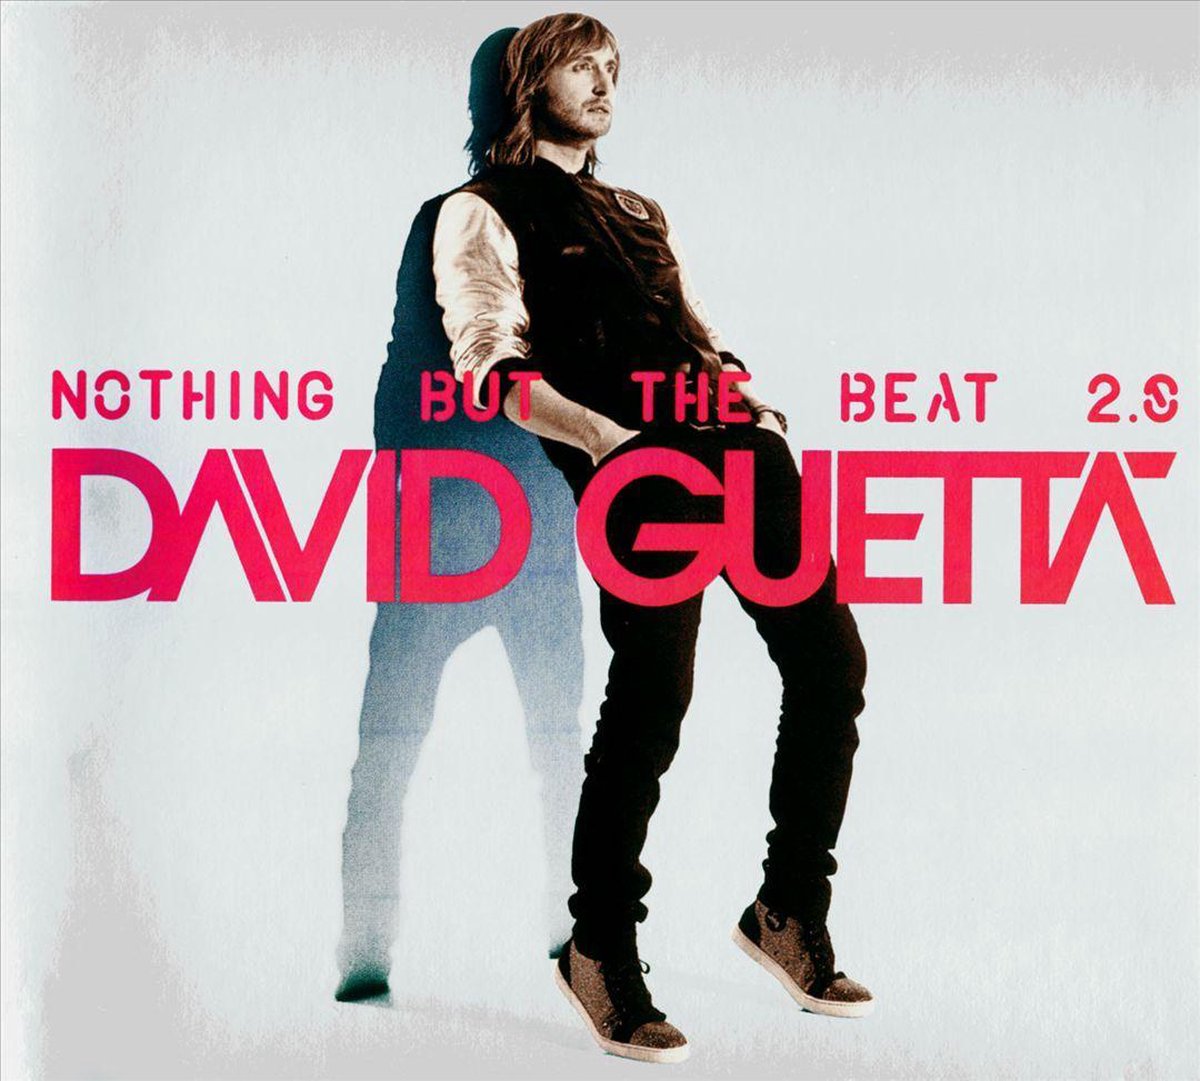 Nothing But the Beat - David Guetta